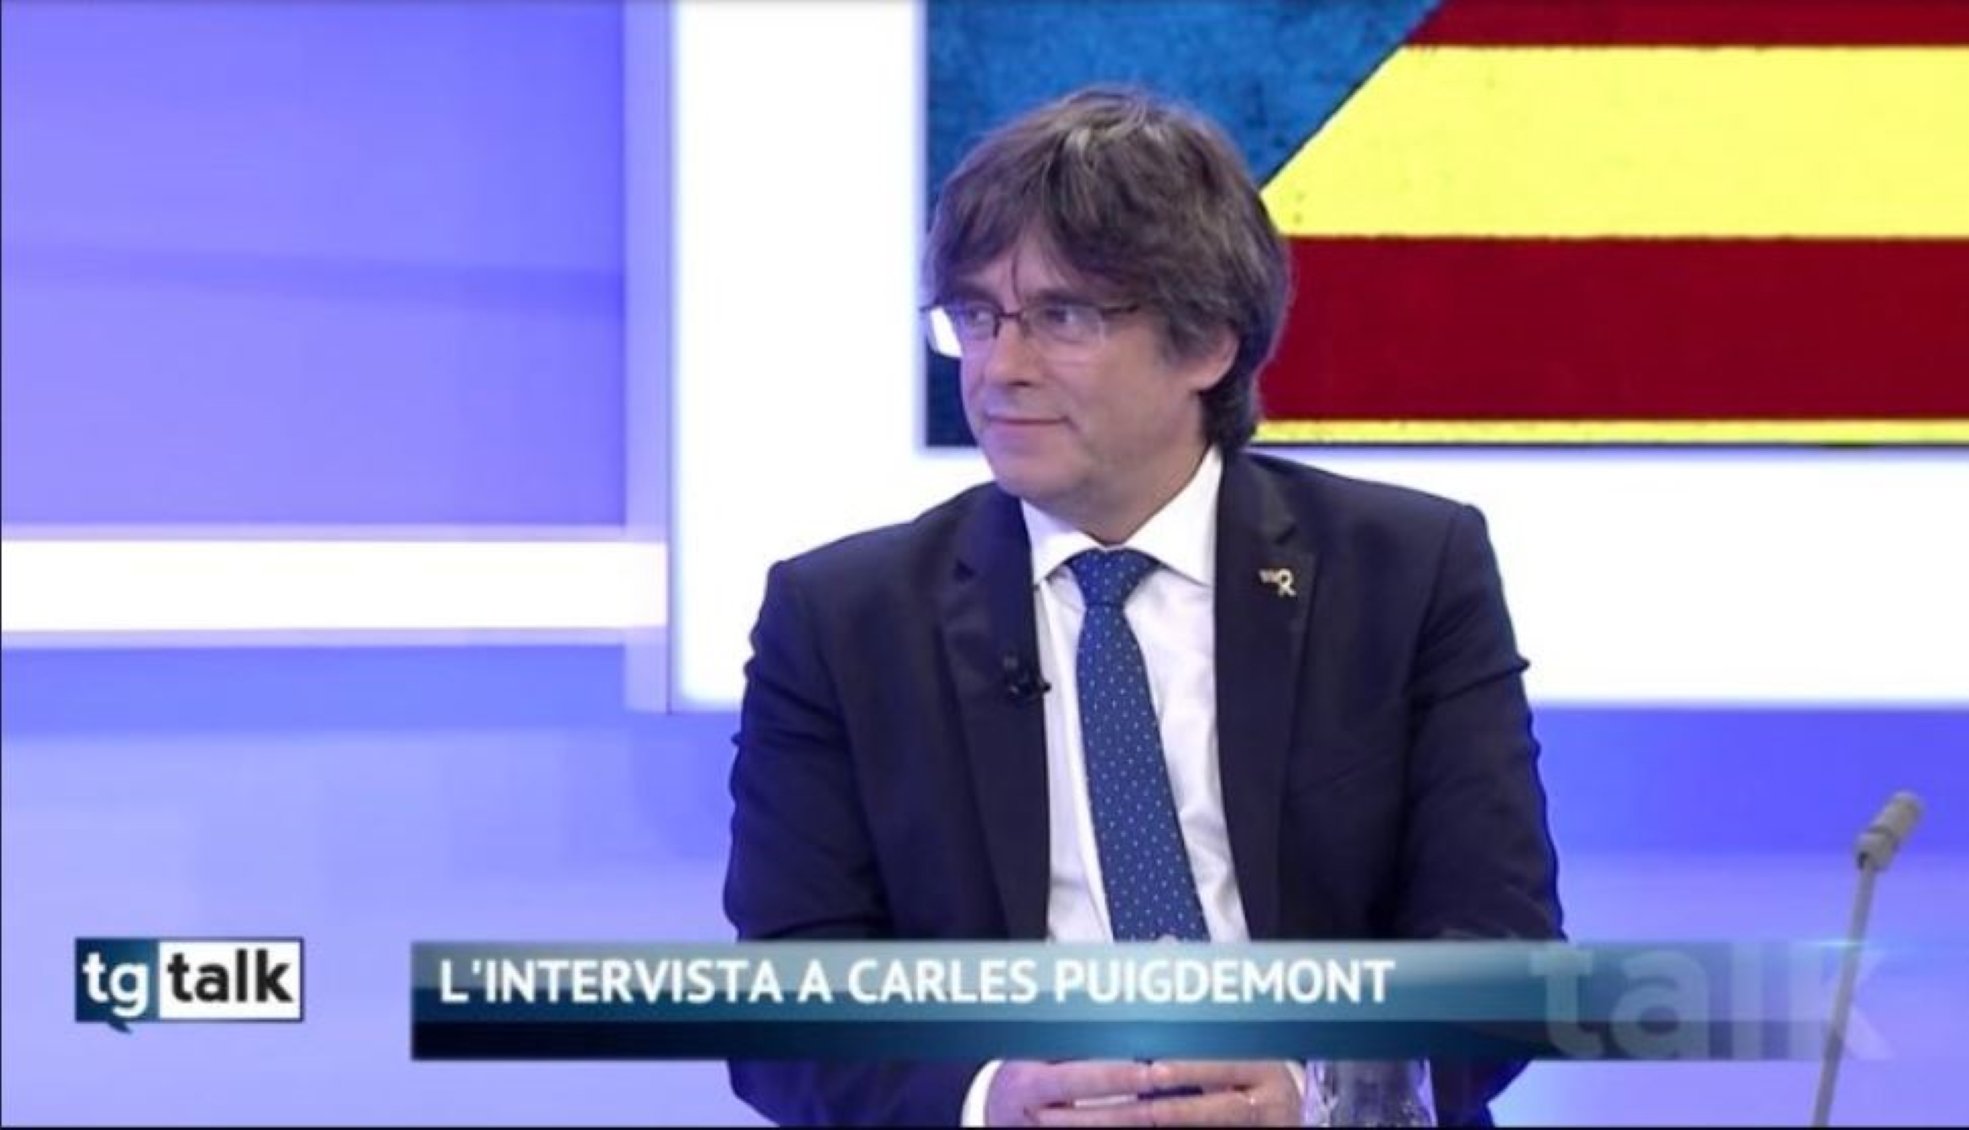 Puigdemont, interviewed by Swiss, Italian and Russian media: dialogue but unilateralism